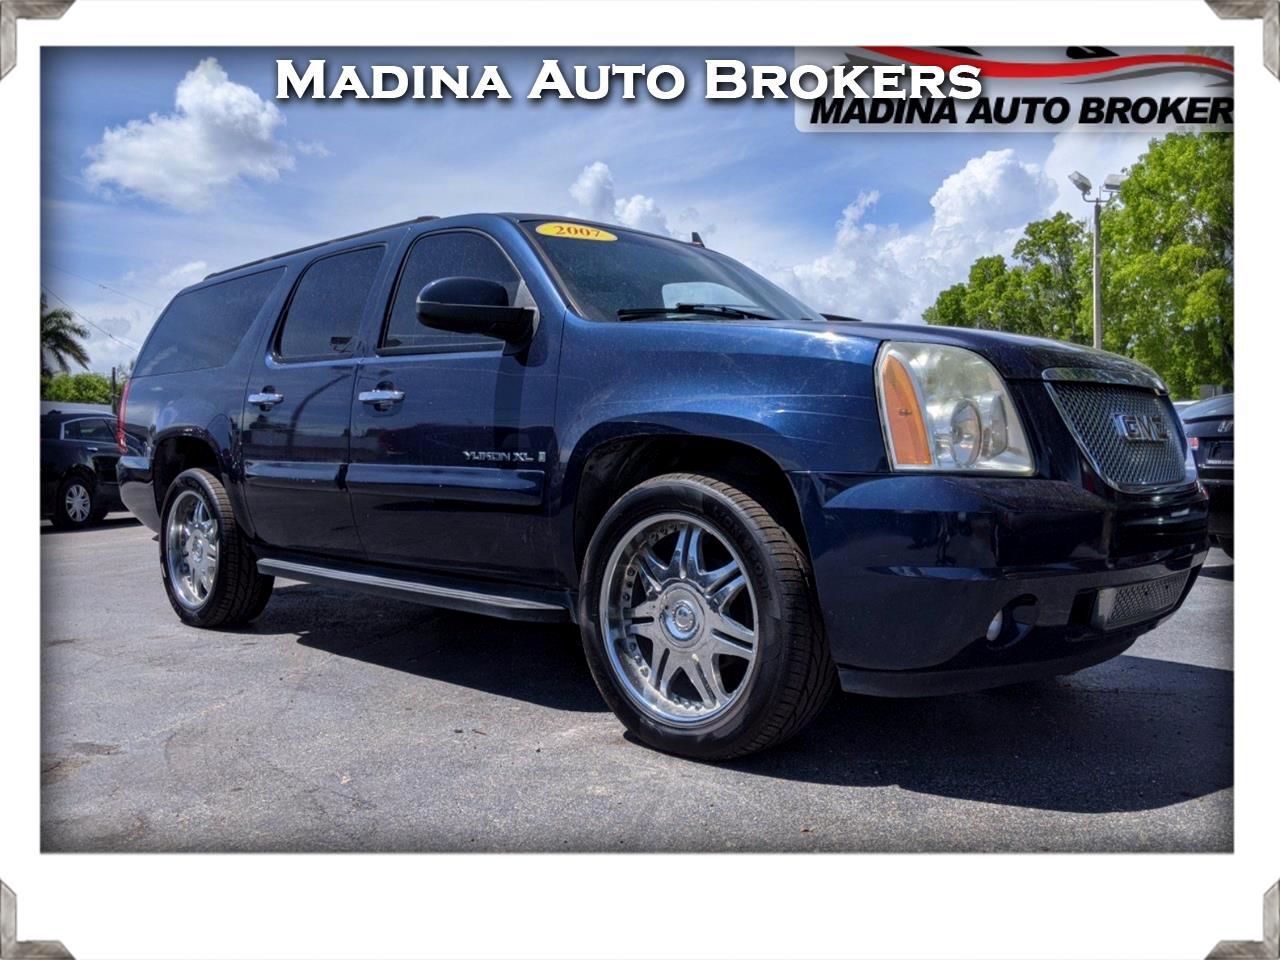 Used 2007 GMC Yukon XL 2WD 4dr 1500 SLE for Sale in Ft. Myers FL 33901  Madina Auto Brokers